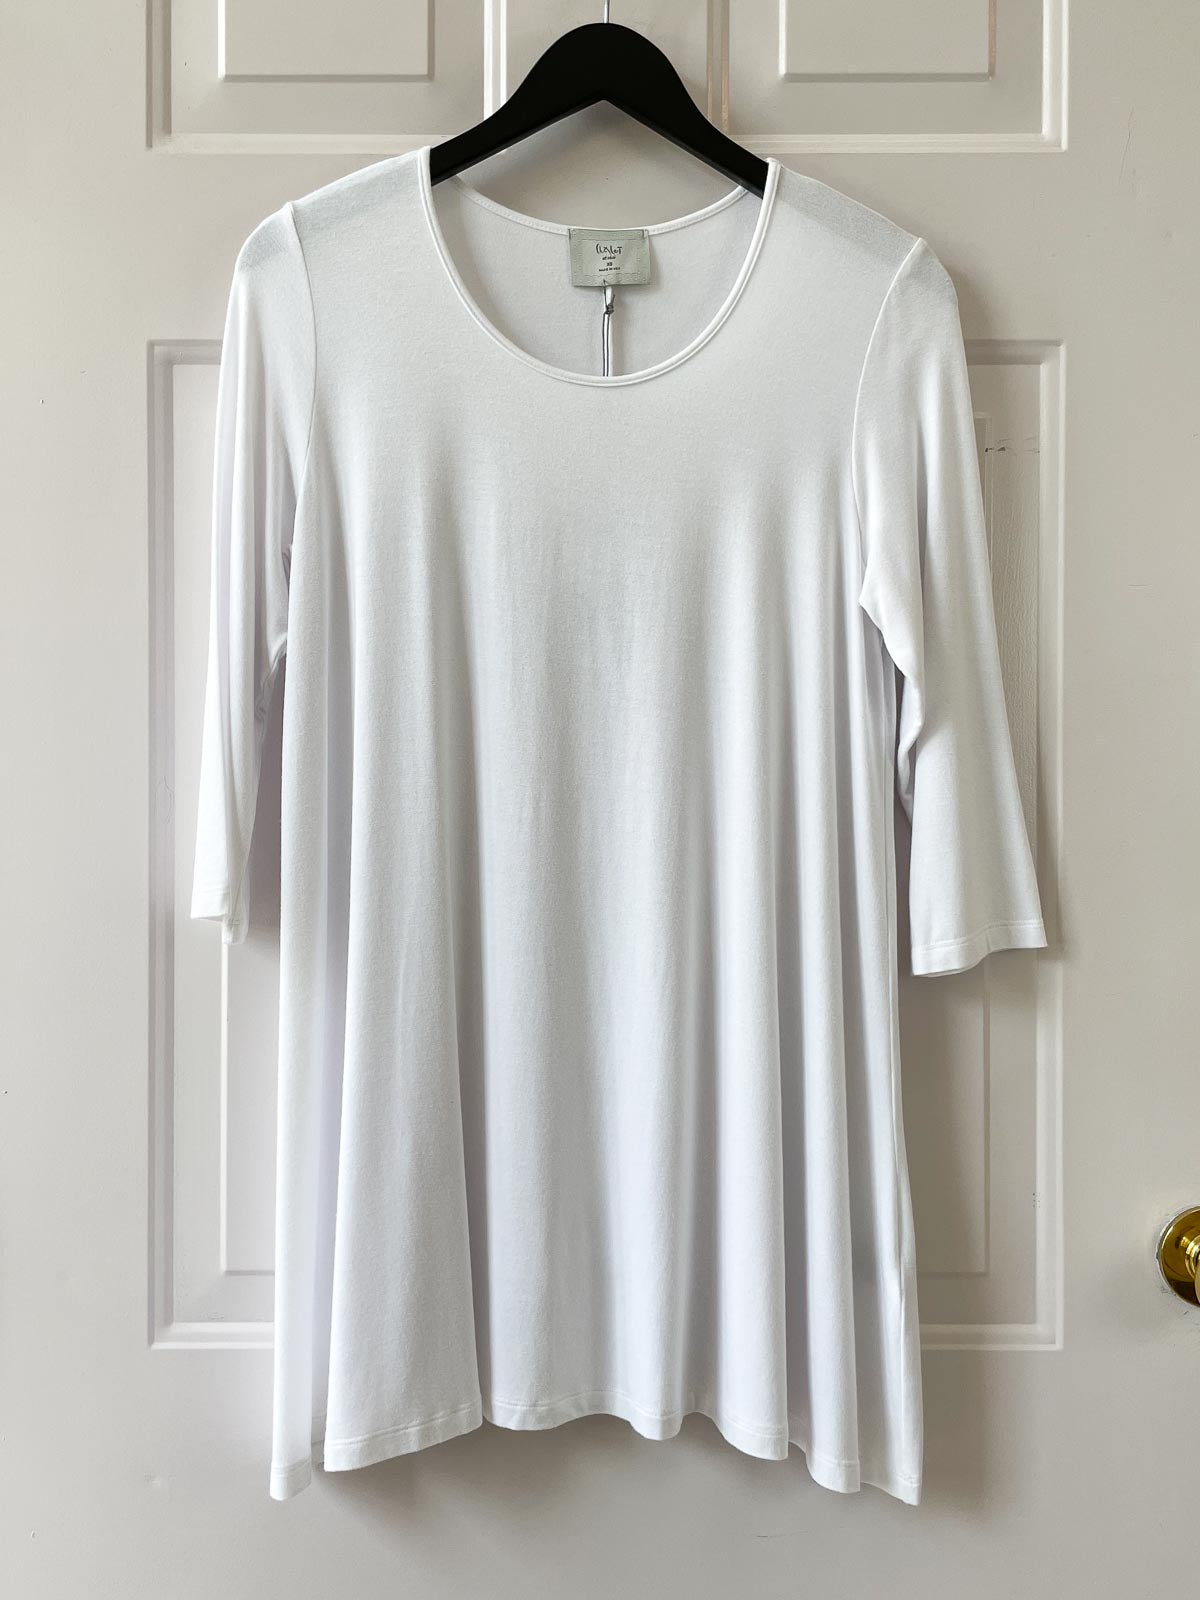 Chalet et ceci Jersey 3/4 Sleeve Tunic, White